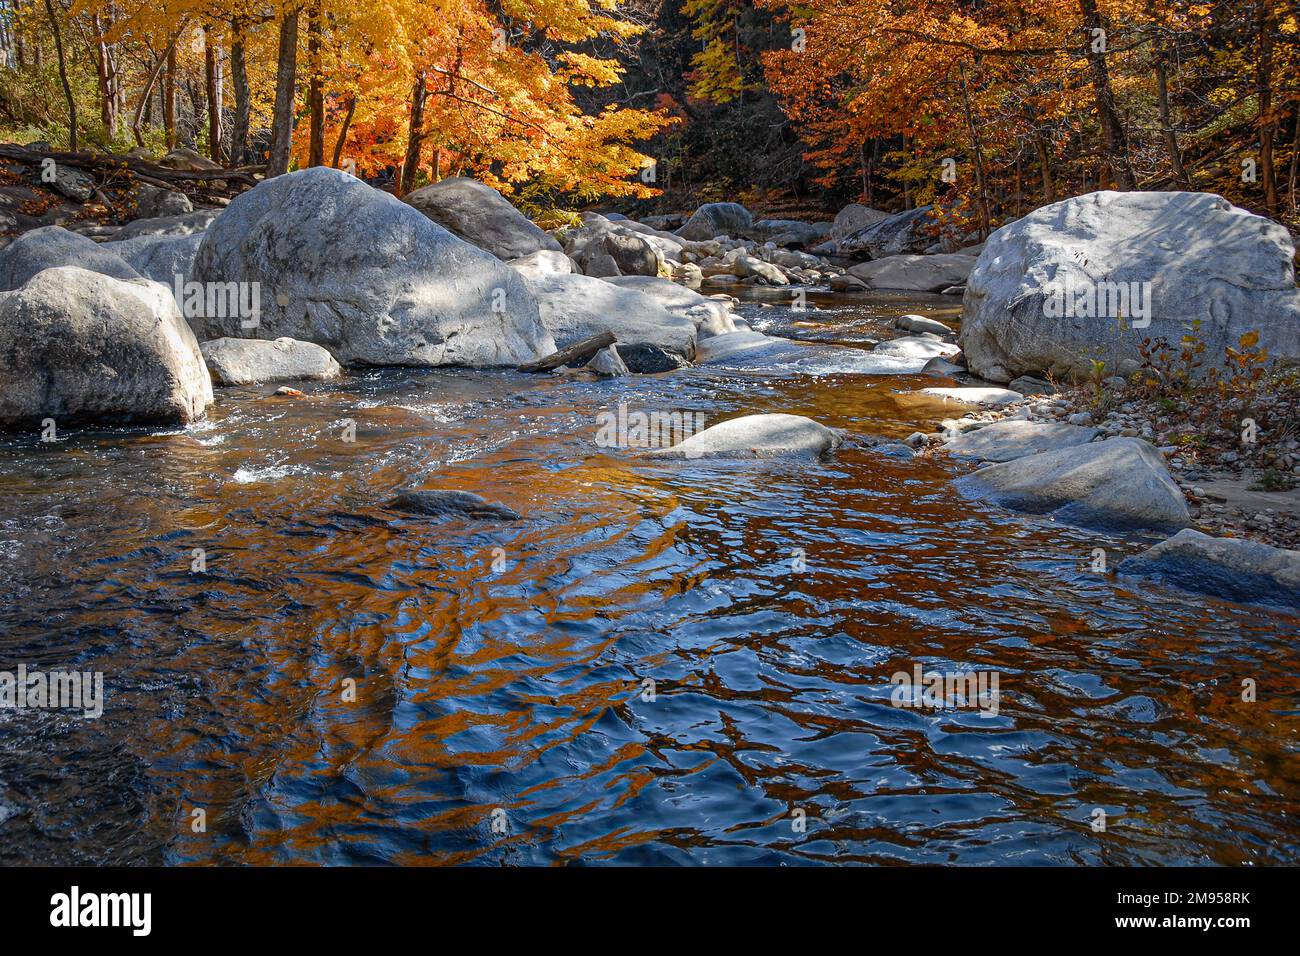 Dappled sunlight filters through Autumn leaves onto rocks and boulders in the beautiful creek at Chimney Rock, North Carolina. (USA) Stock Photo